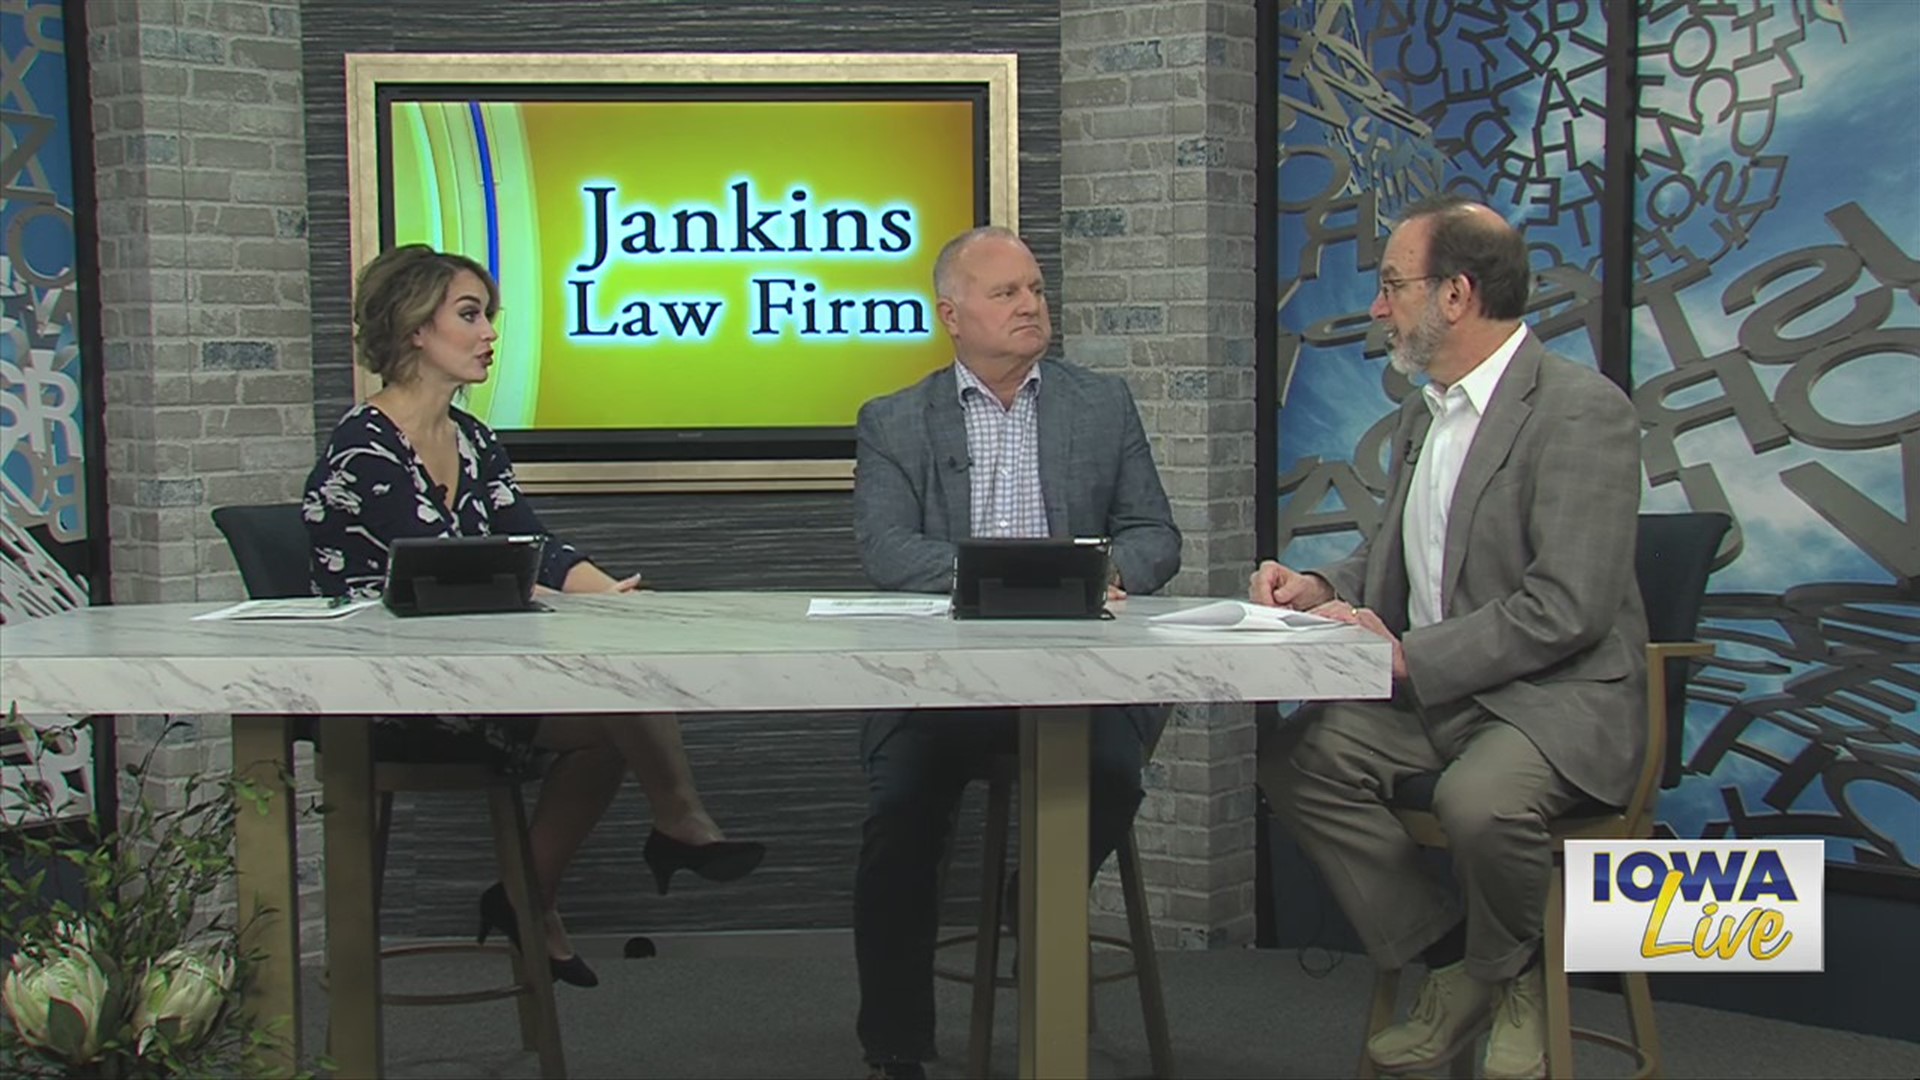 Jankins Law Firm Veterans' Day special